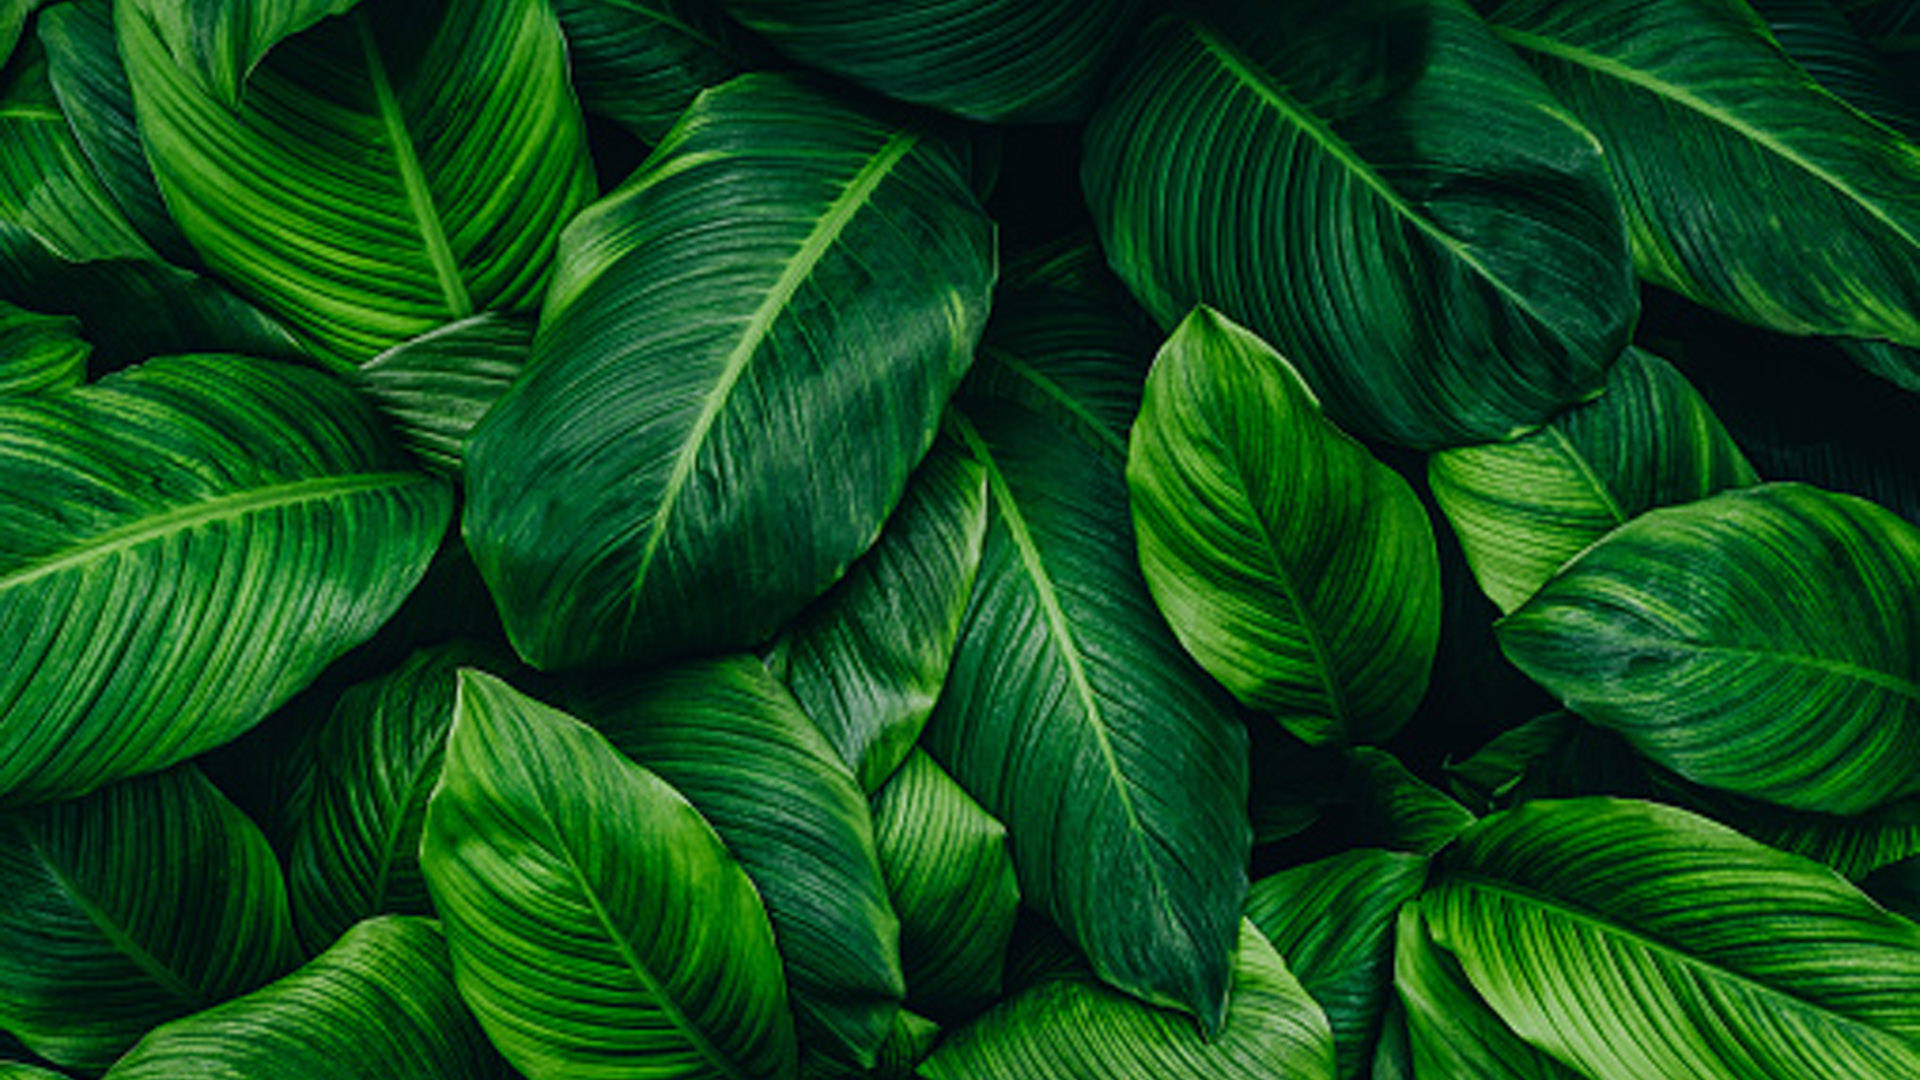 200+] Green Nature Wallpapers for FREE 